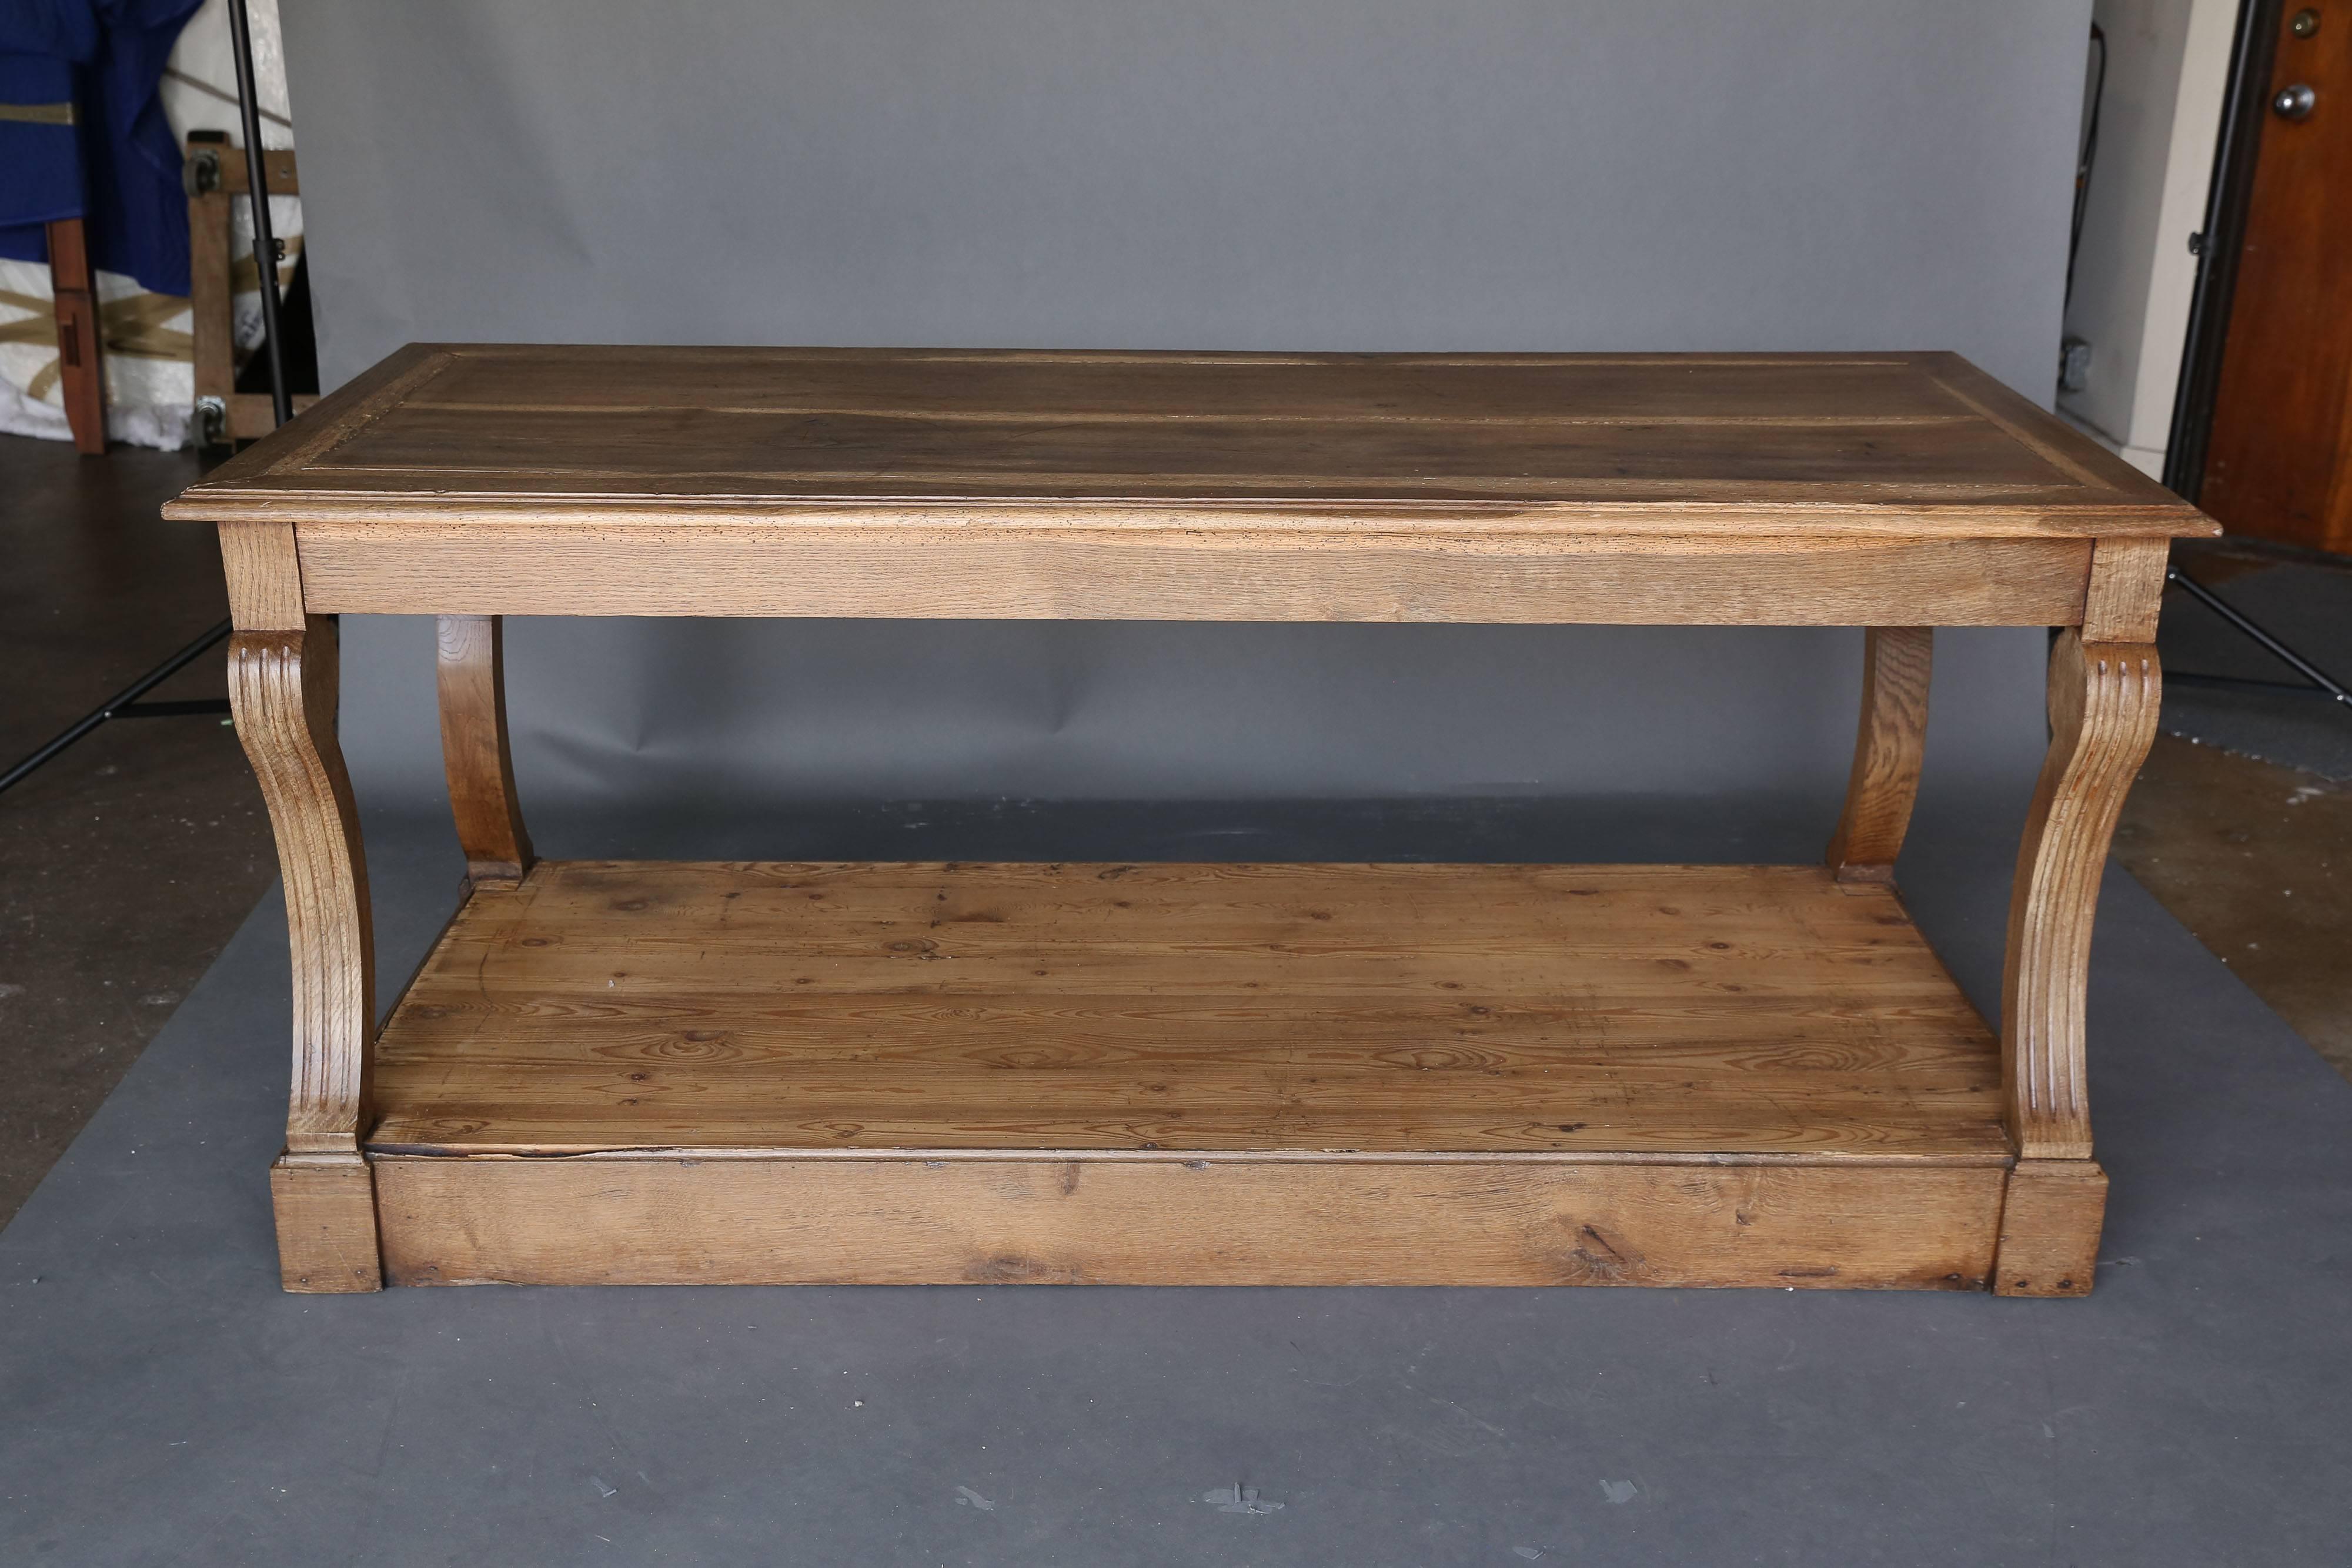 19th century oak Draper's table from a silk factory in lyon. Beautiful fluted swooping leg at all four corners and could be used as a floating table. Piece has shelf below. Wood grain on top makes it look like it is striped. This is one of a pair